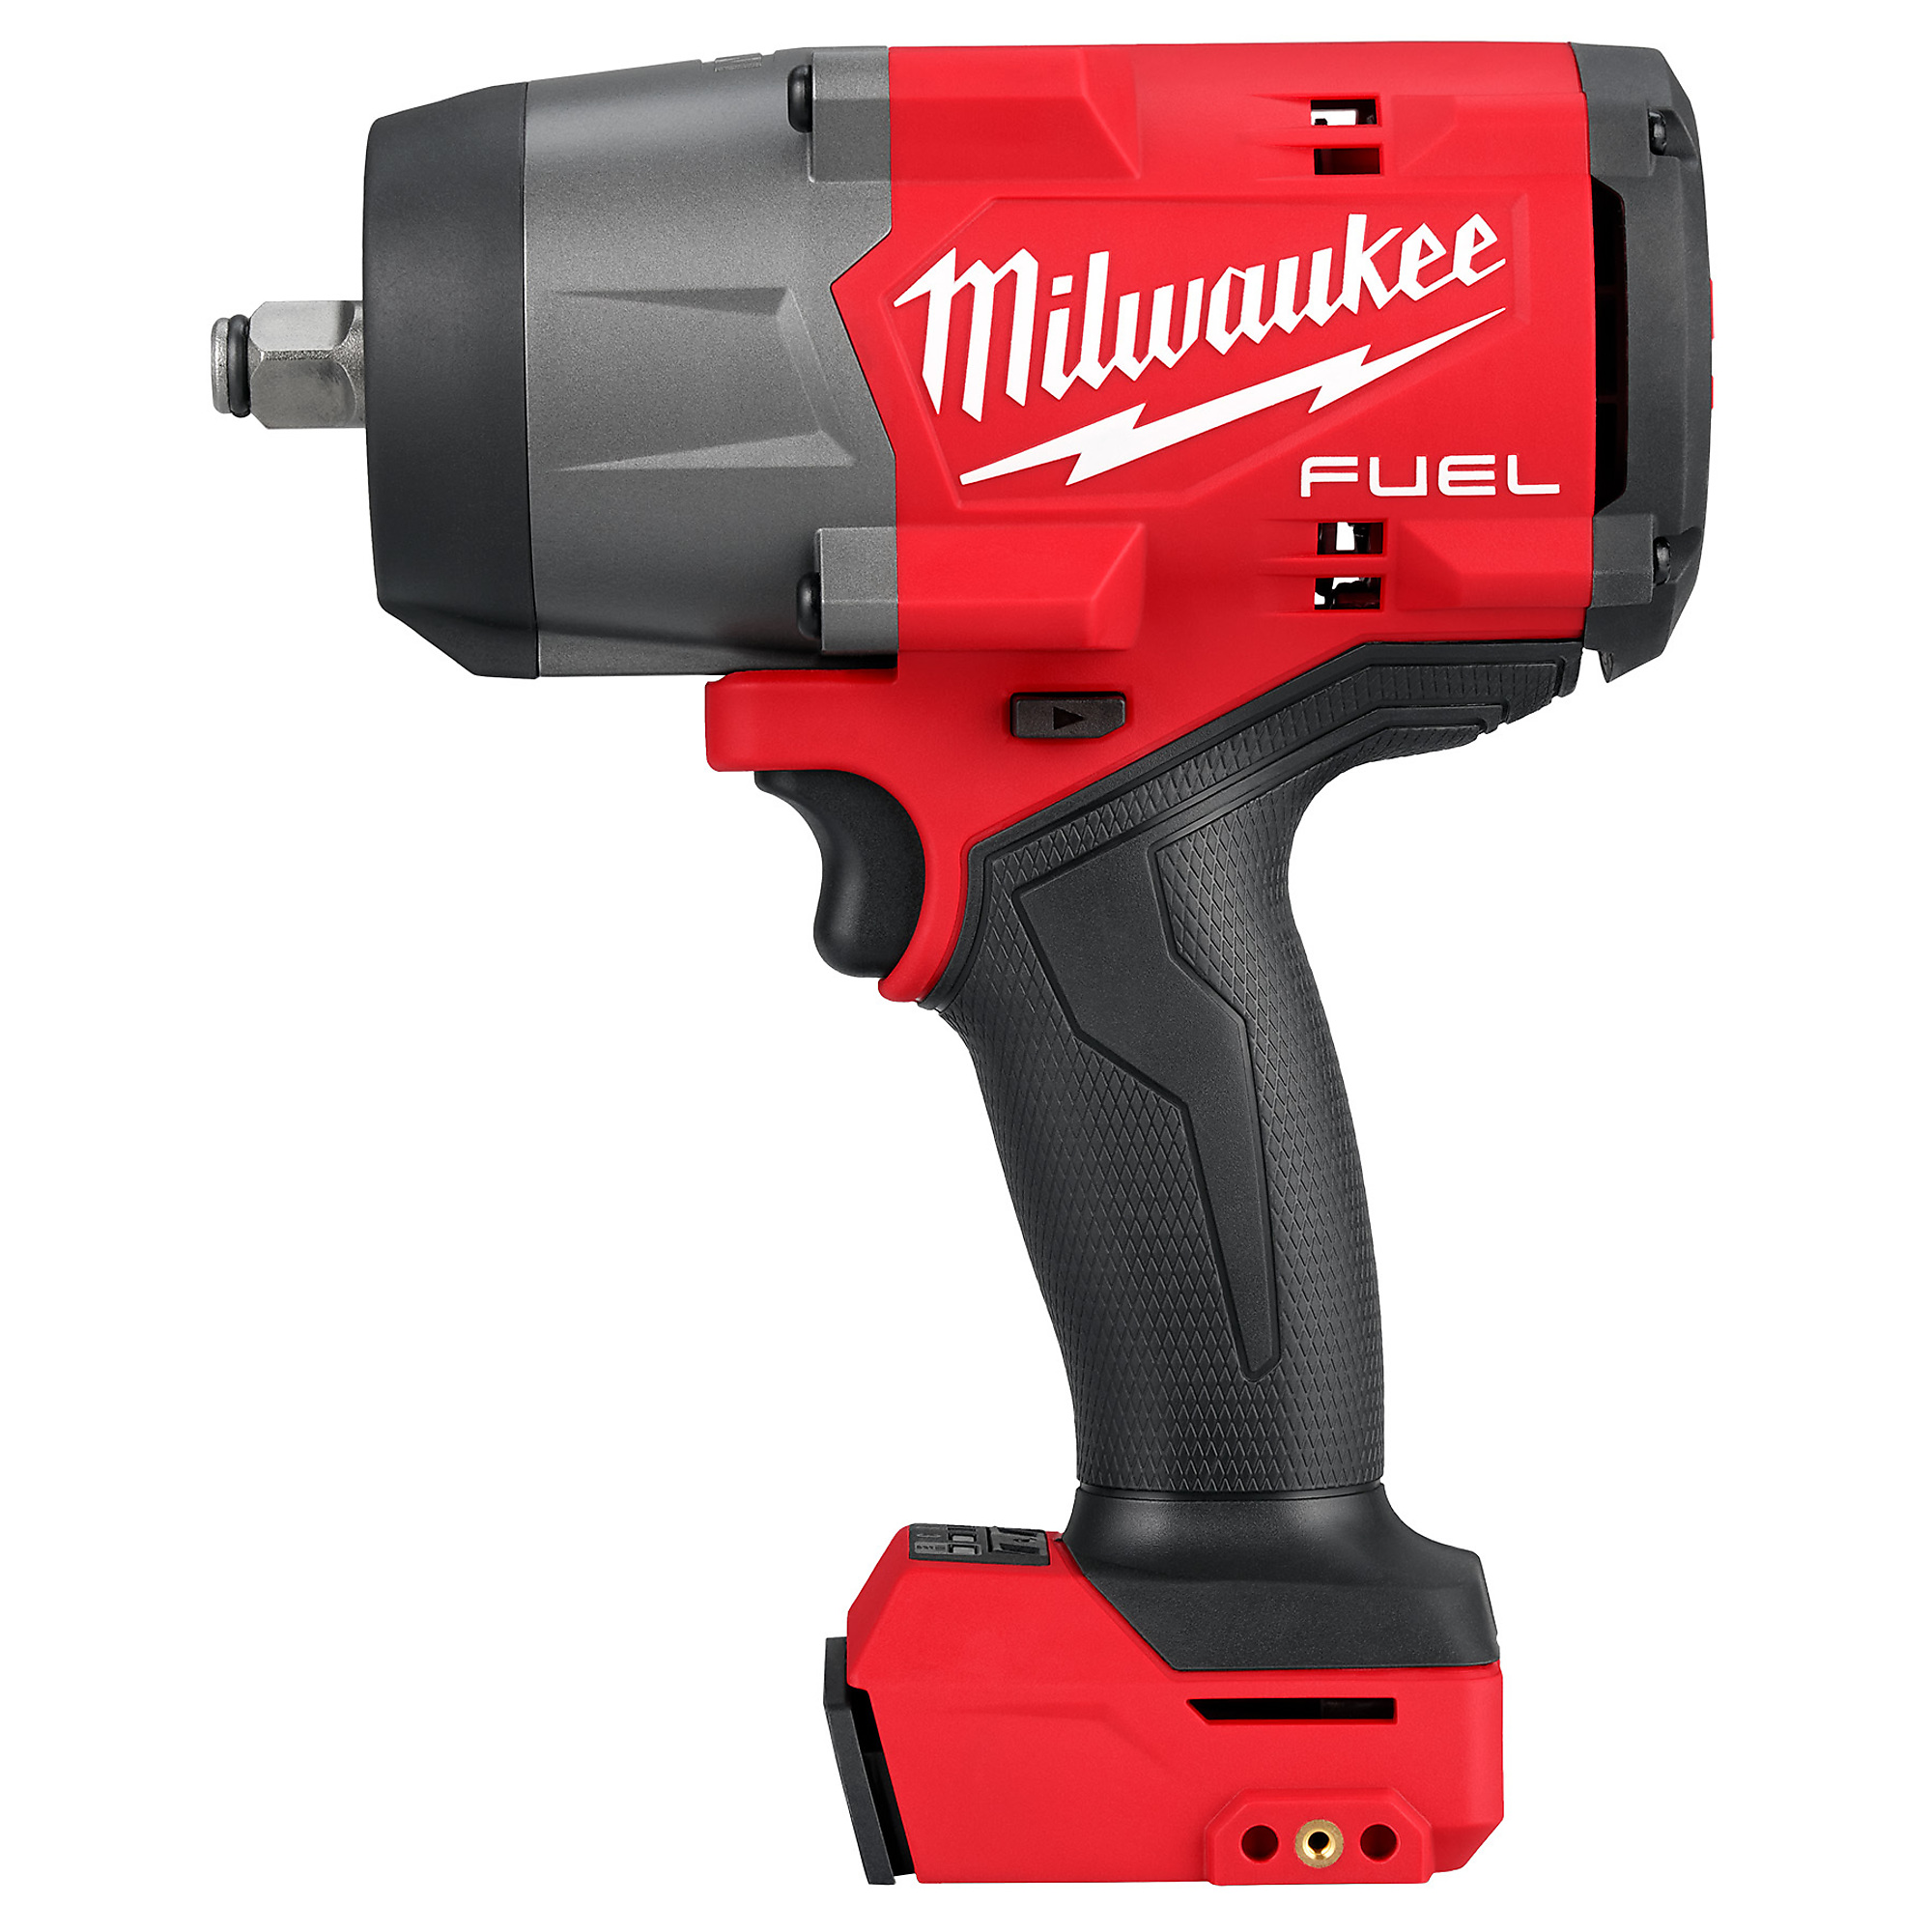 M18 FUEL™ 1/2 Hammer Drill/Driver (Tool Only)